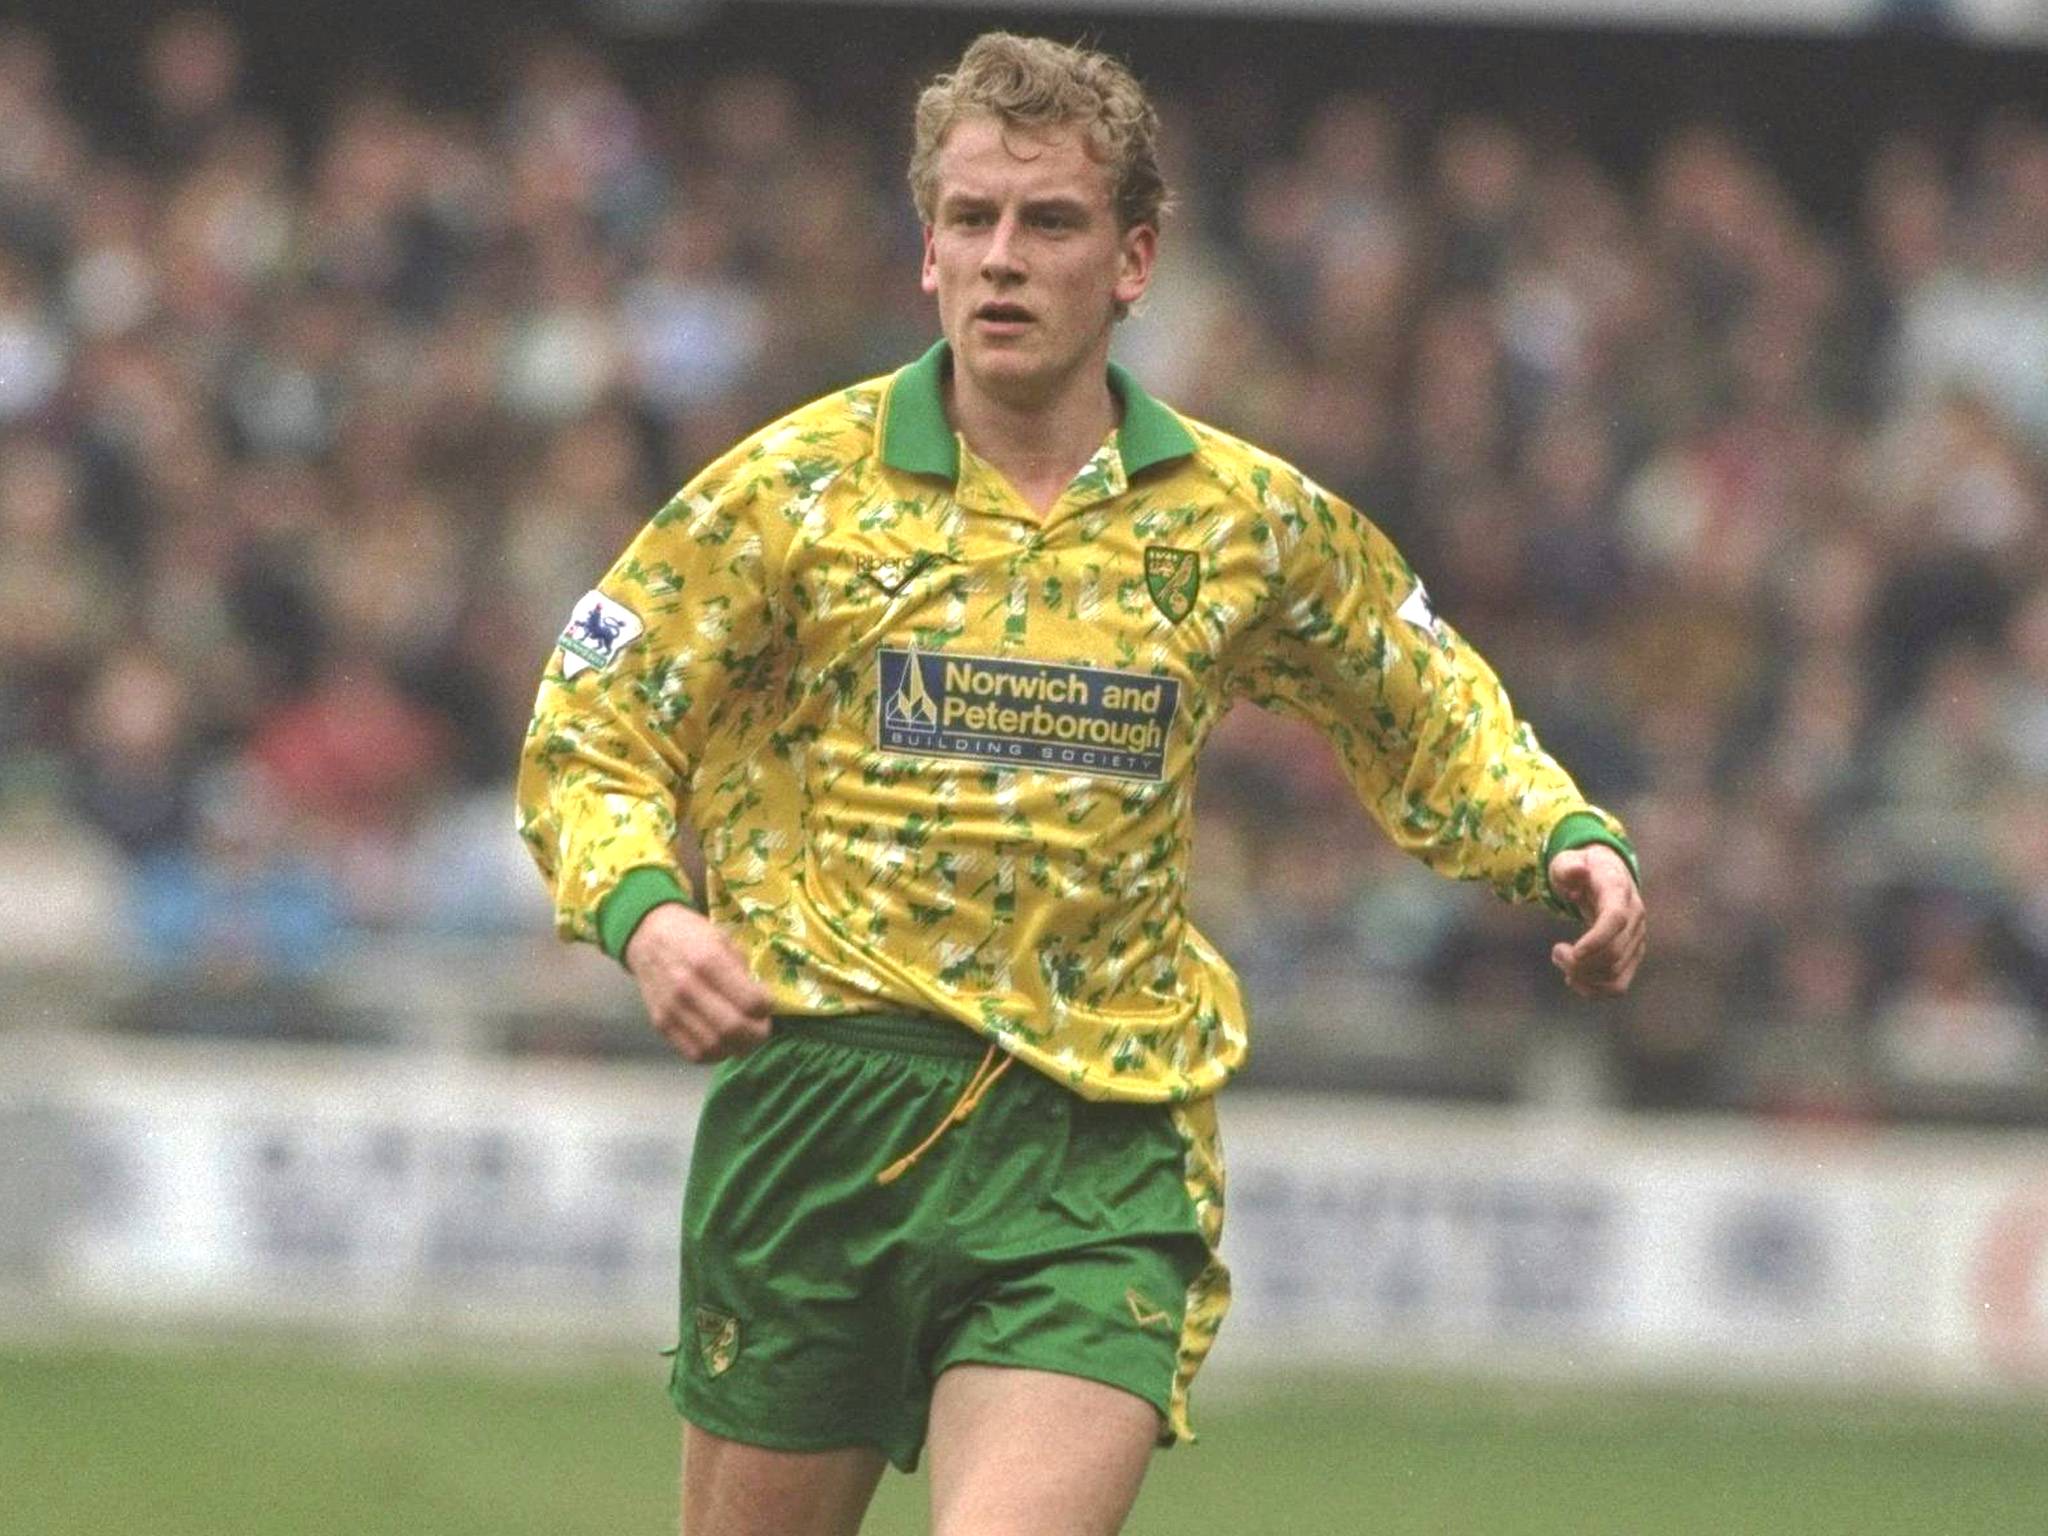 Lee Power in his Norwich City days, when he first forged links with Spurs’ Tim Sherwood